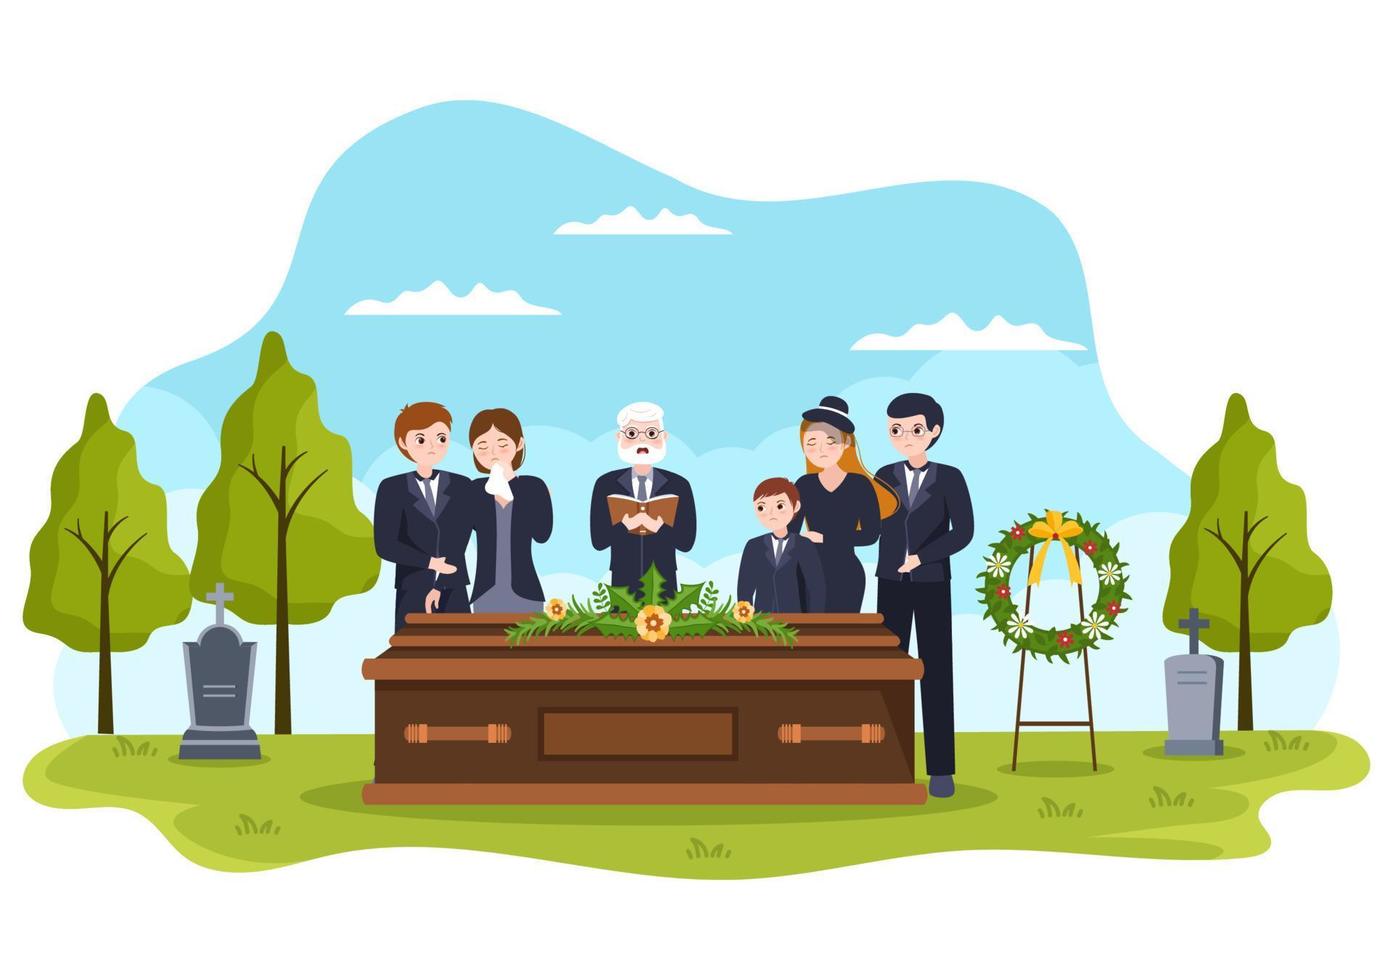 Funeral Ceremony in Grave of Sad People in Black Clothes Standing and Wreath Around Coffin in Flat Cartoon Hand Drawn Template Illustration vector